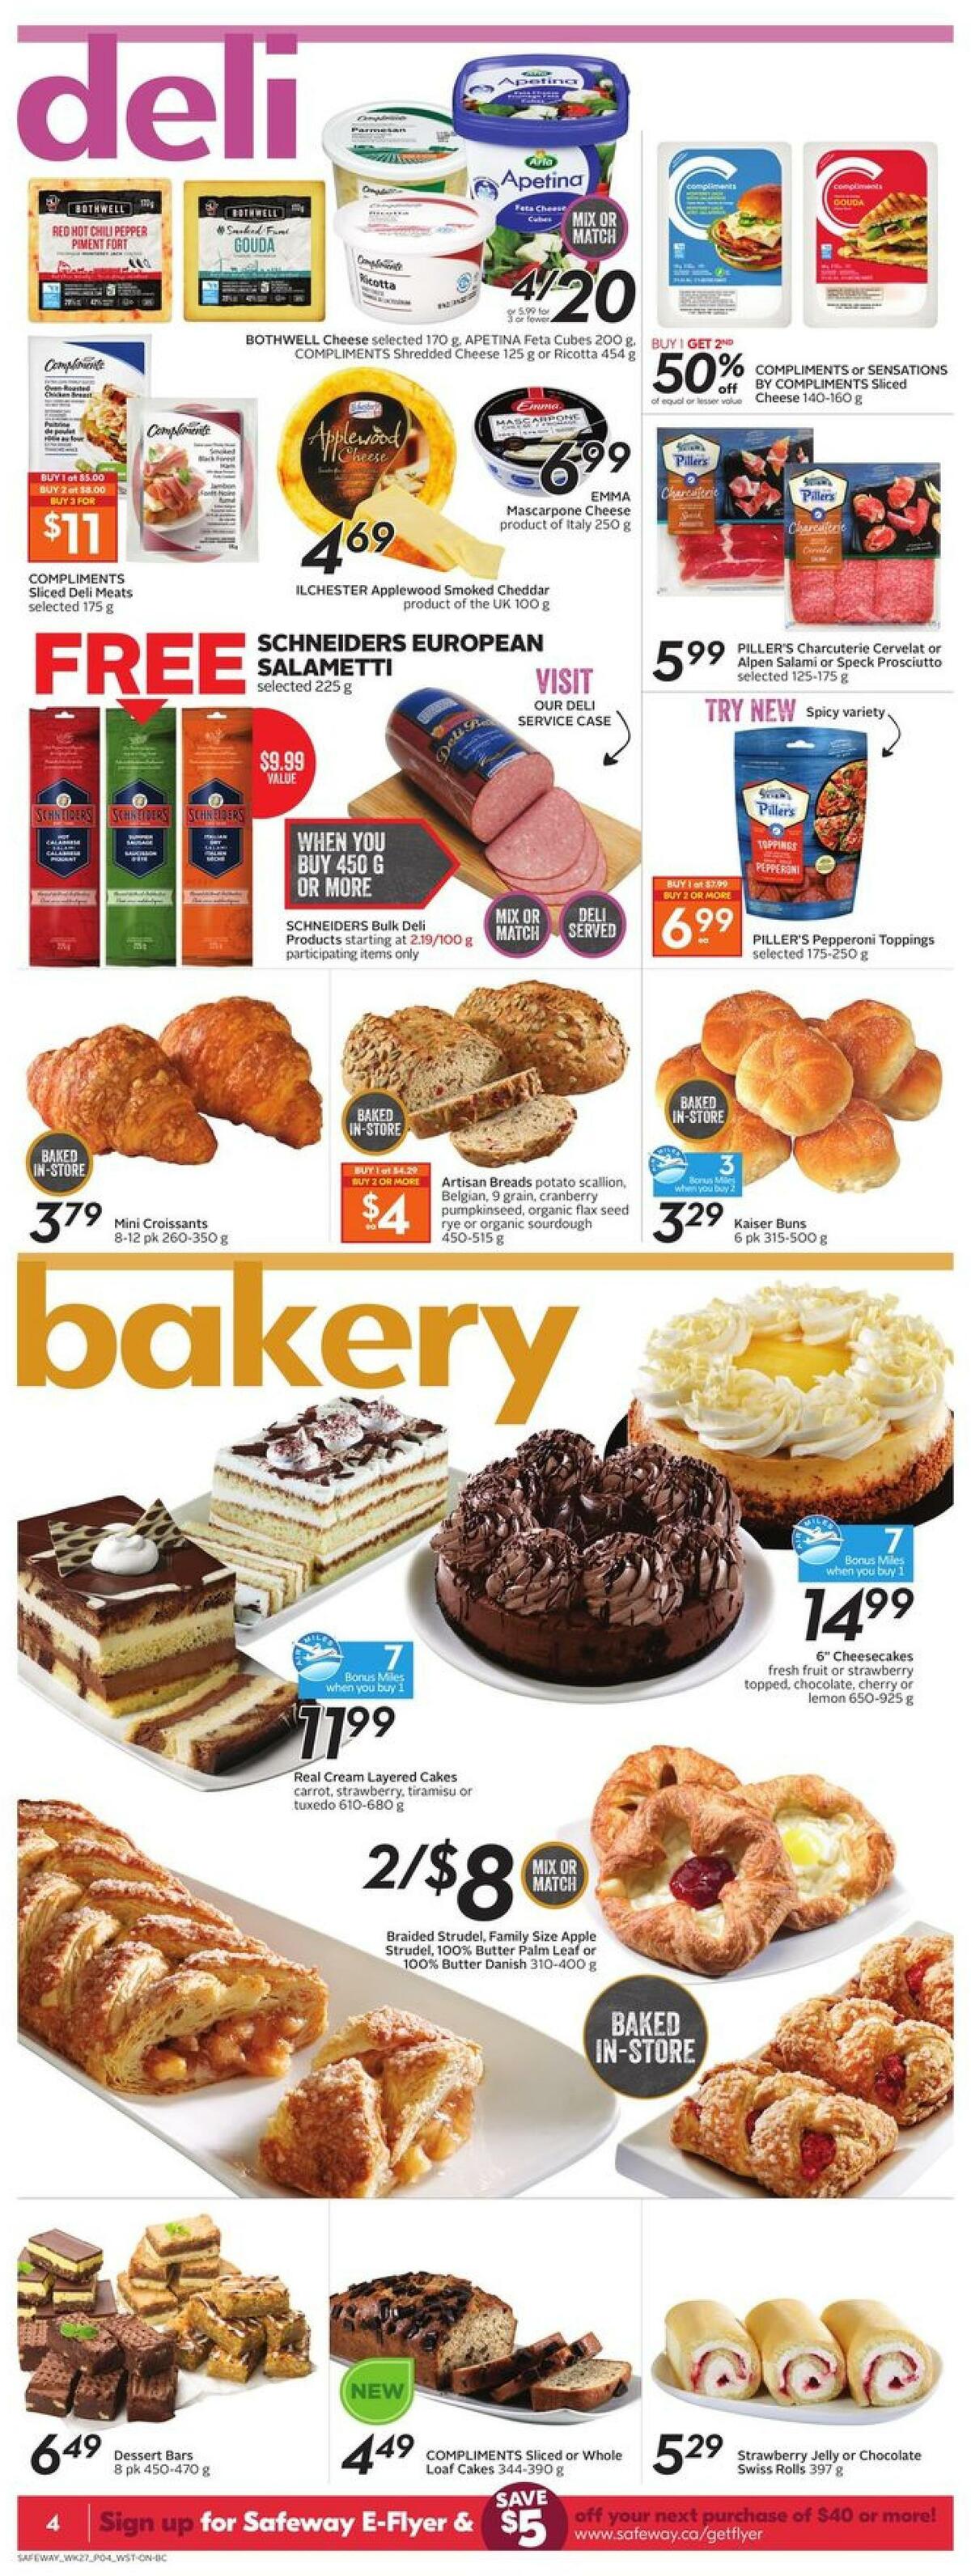 Safeway Flyer from October 29